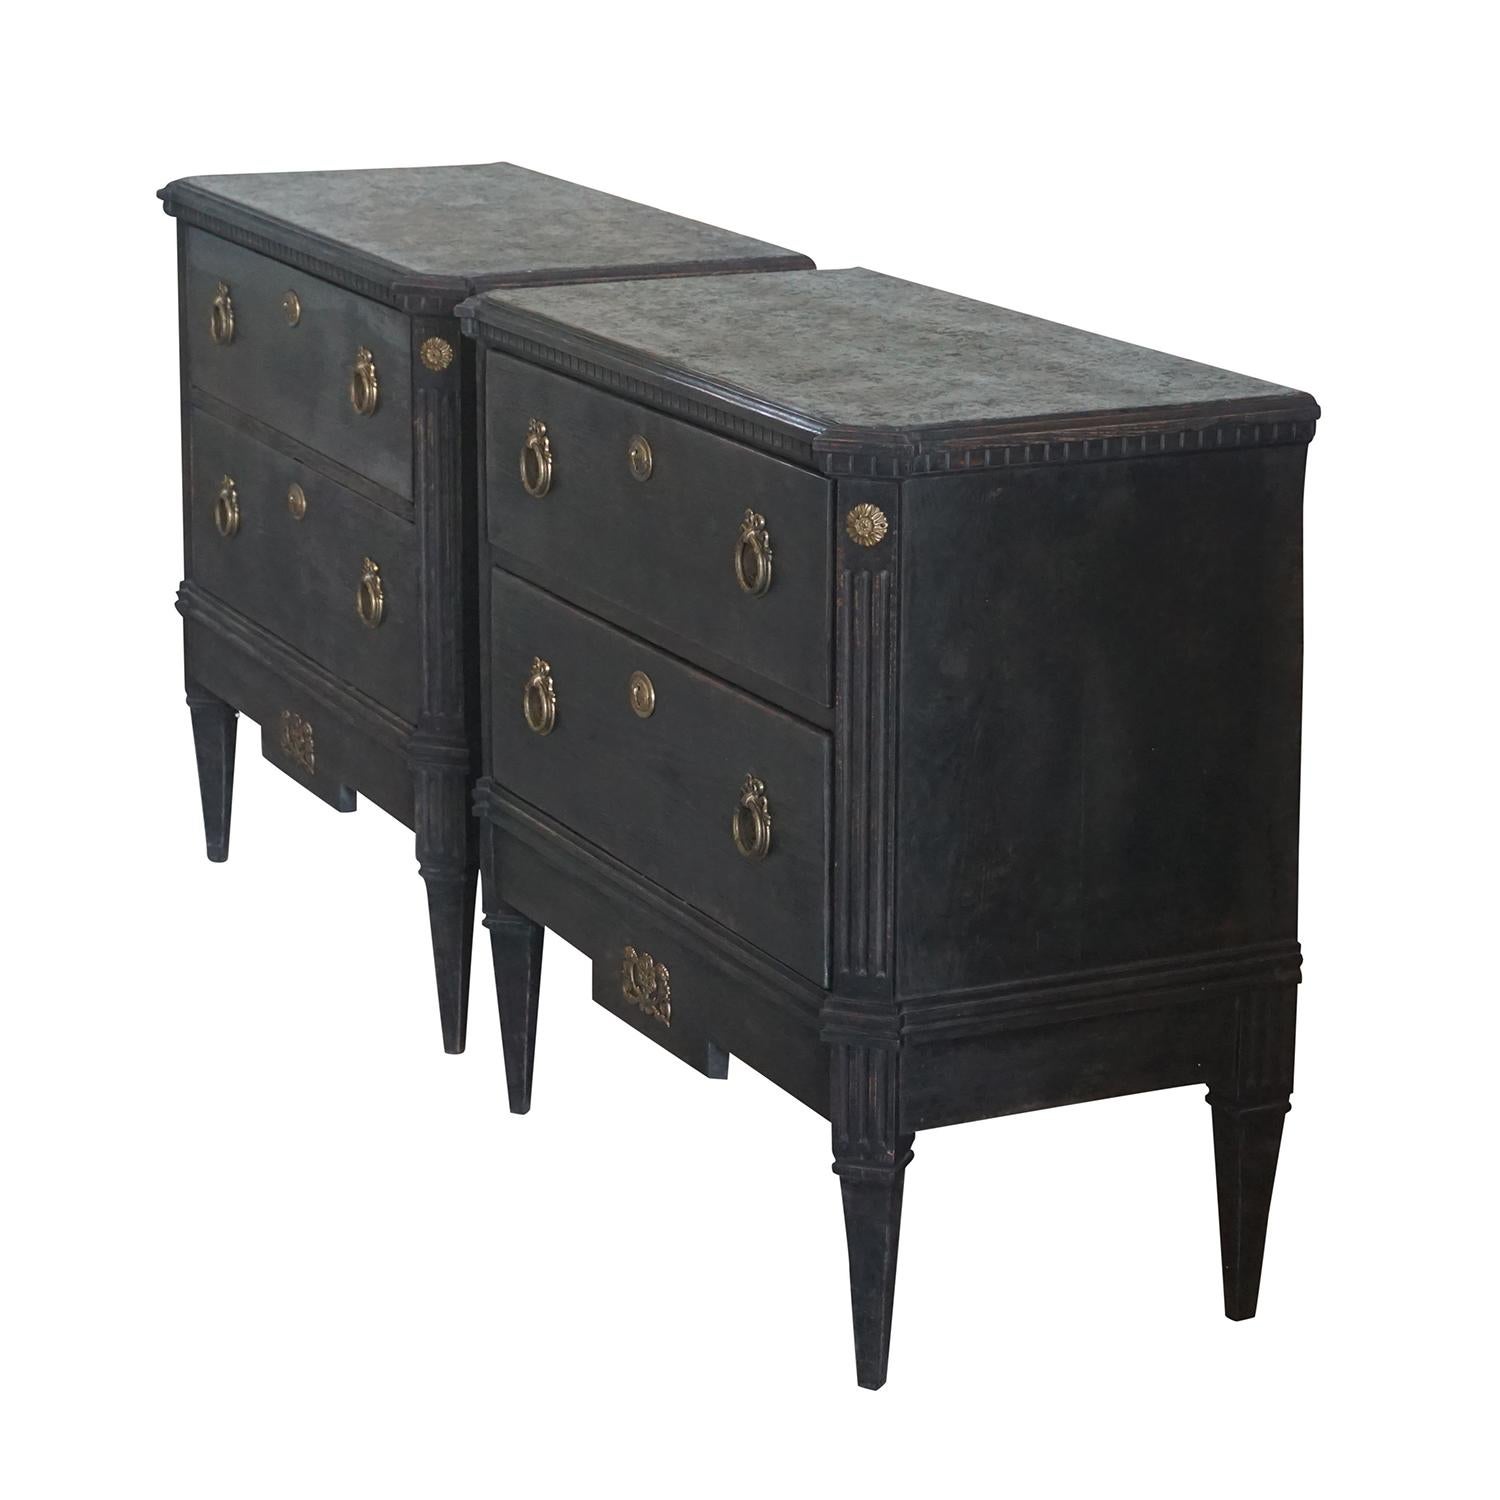 An antique Swedish Gustavian, ornate neoclassical pair of black chest of drawers with faux marble, hand painted tops and original brass locks. The Scandinavian commodes are in good condition. Wear consistent with age and use, circa 1830-1850,